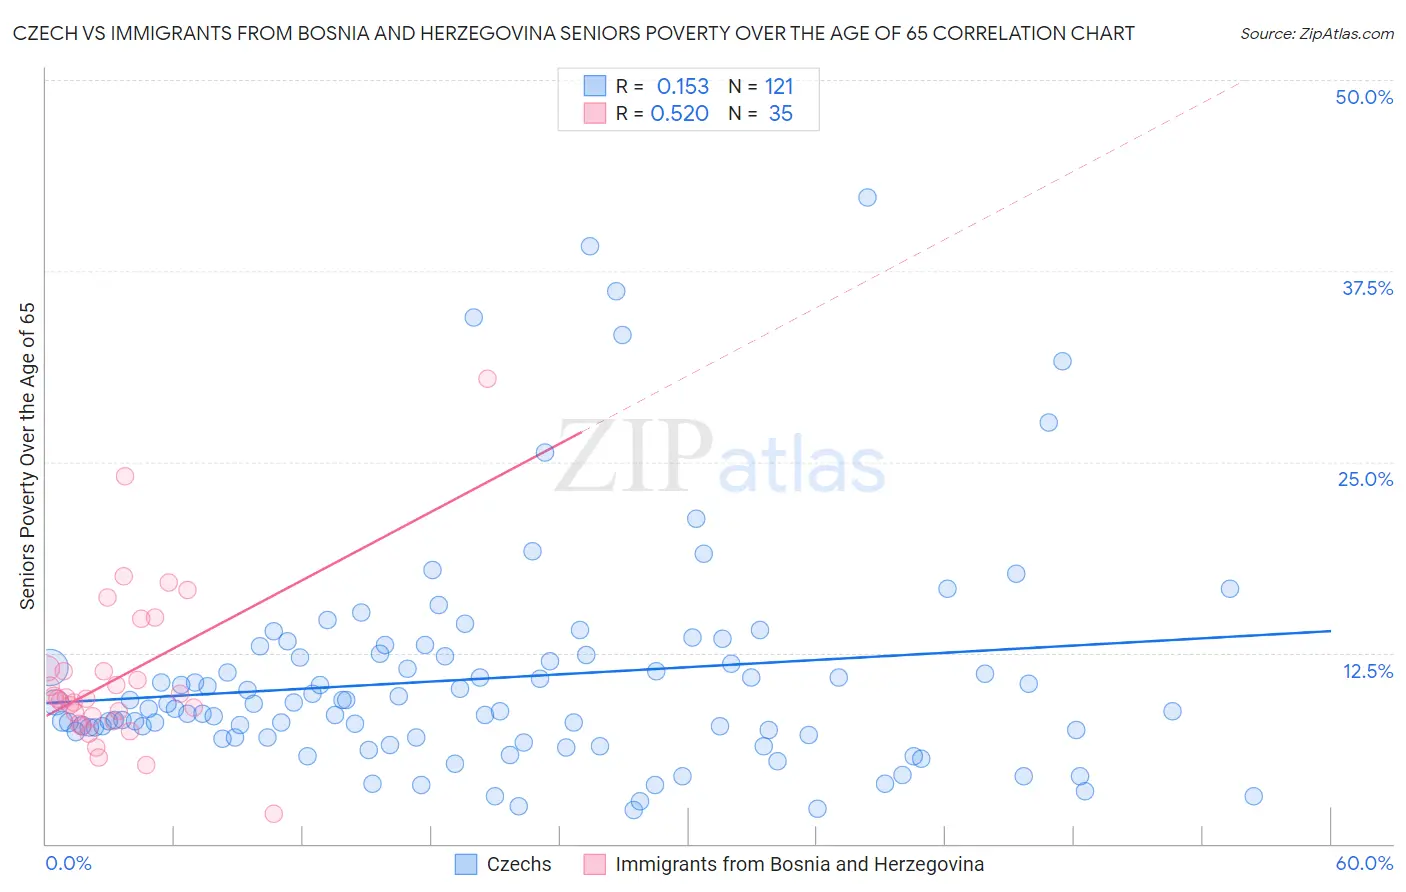 Czech vs Immigrants from Bosnia and Herzegovina Seniors Poverty Over the Age of 65